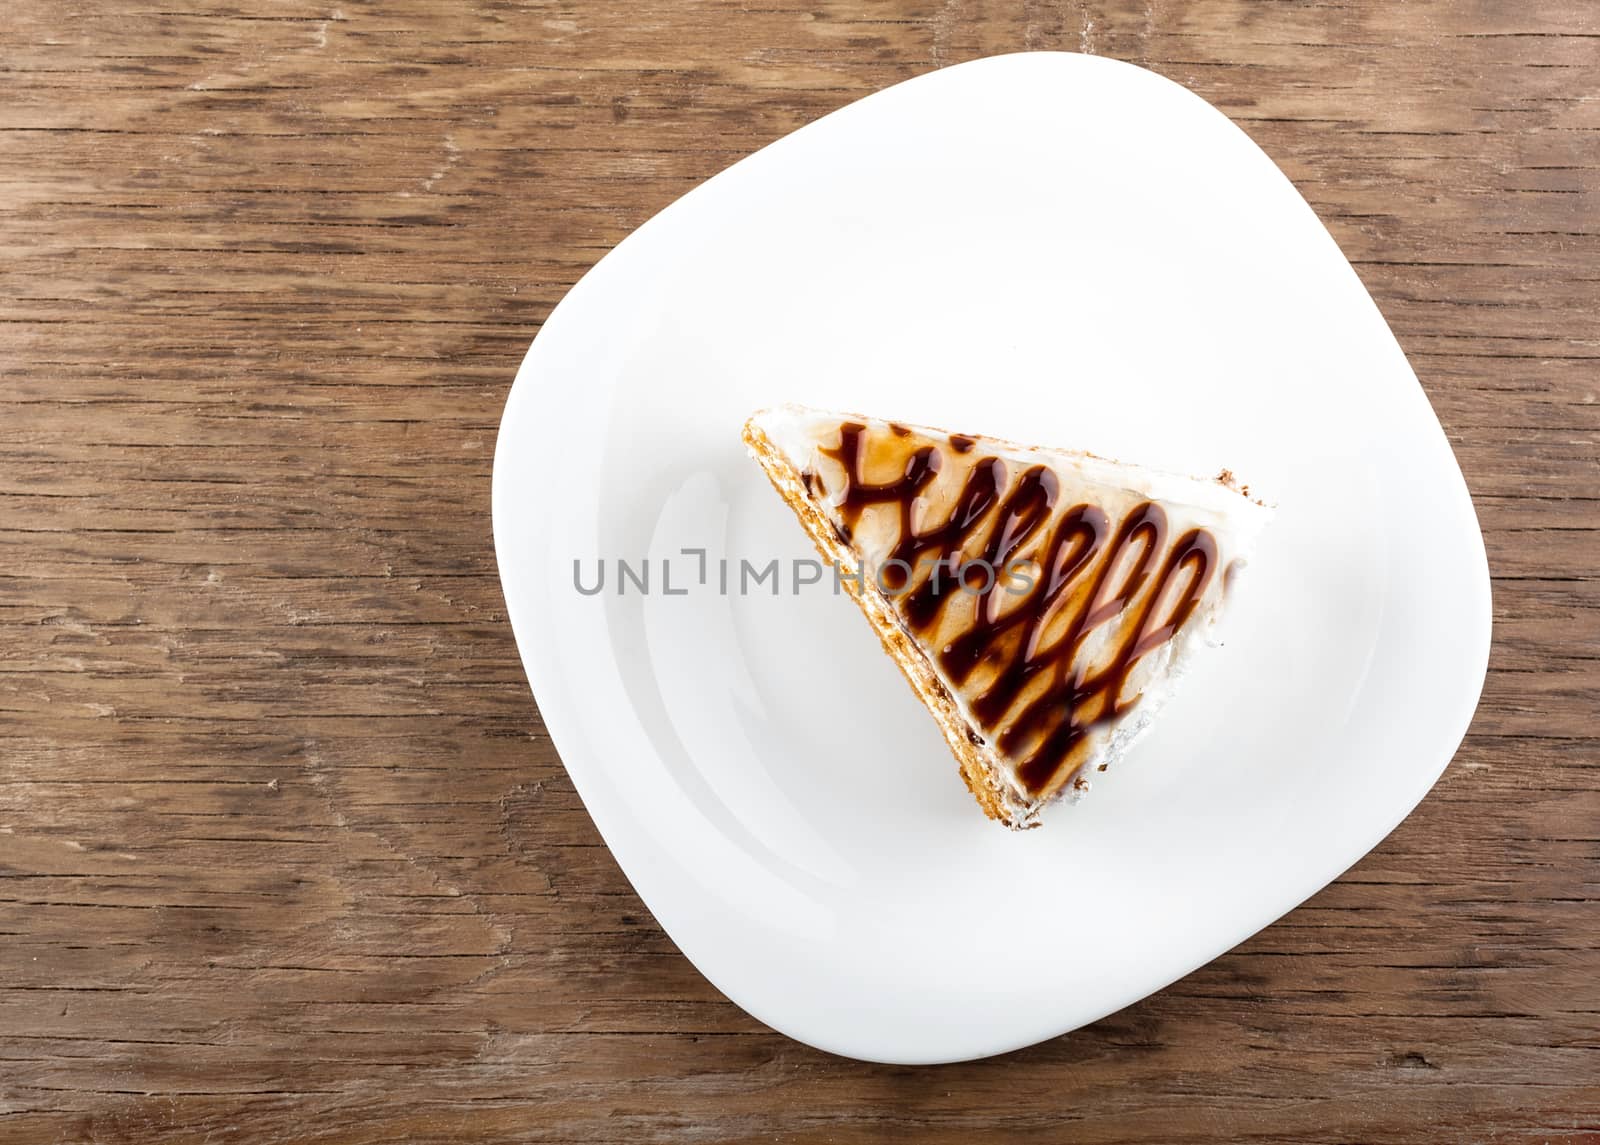 chocolate cake on a plate on a wooden background